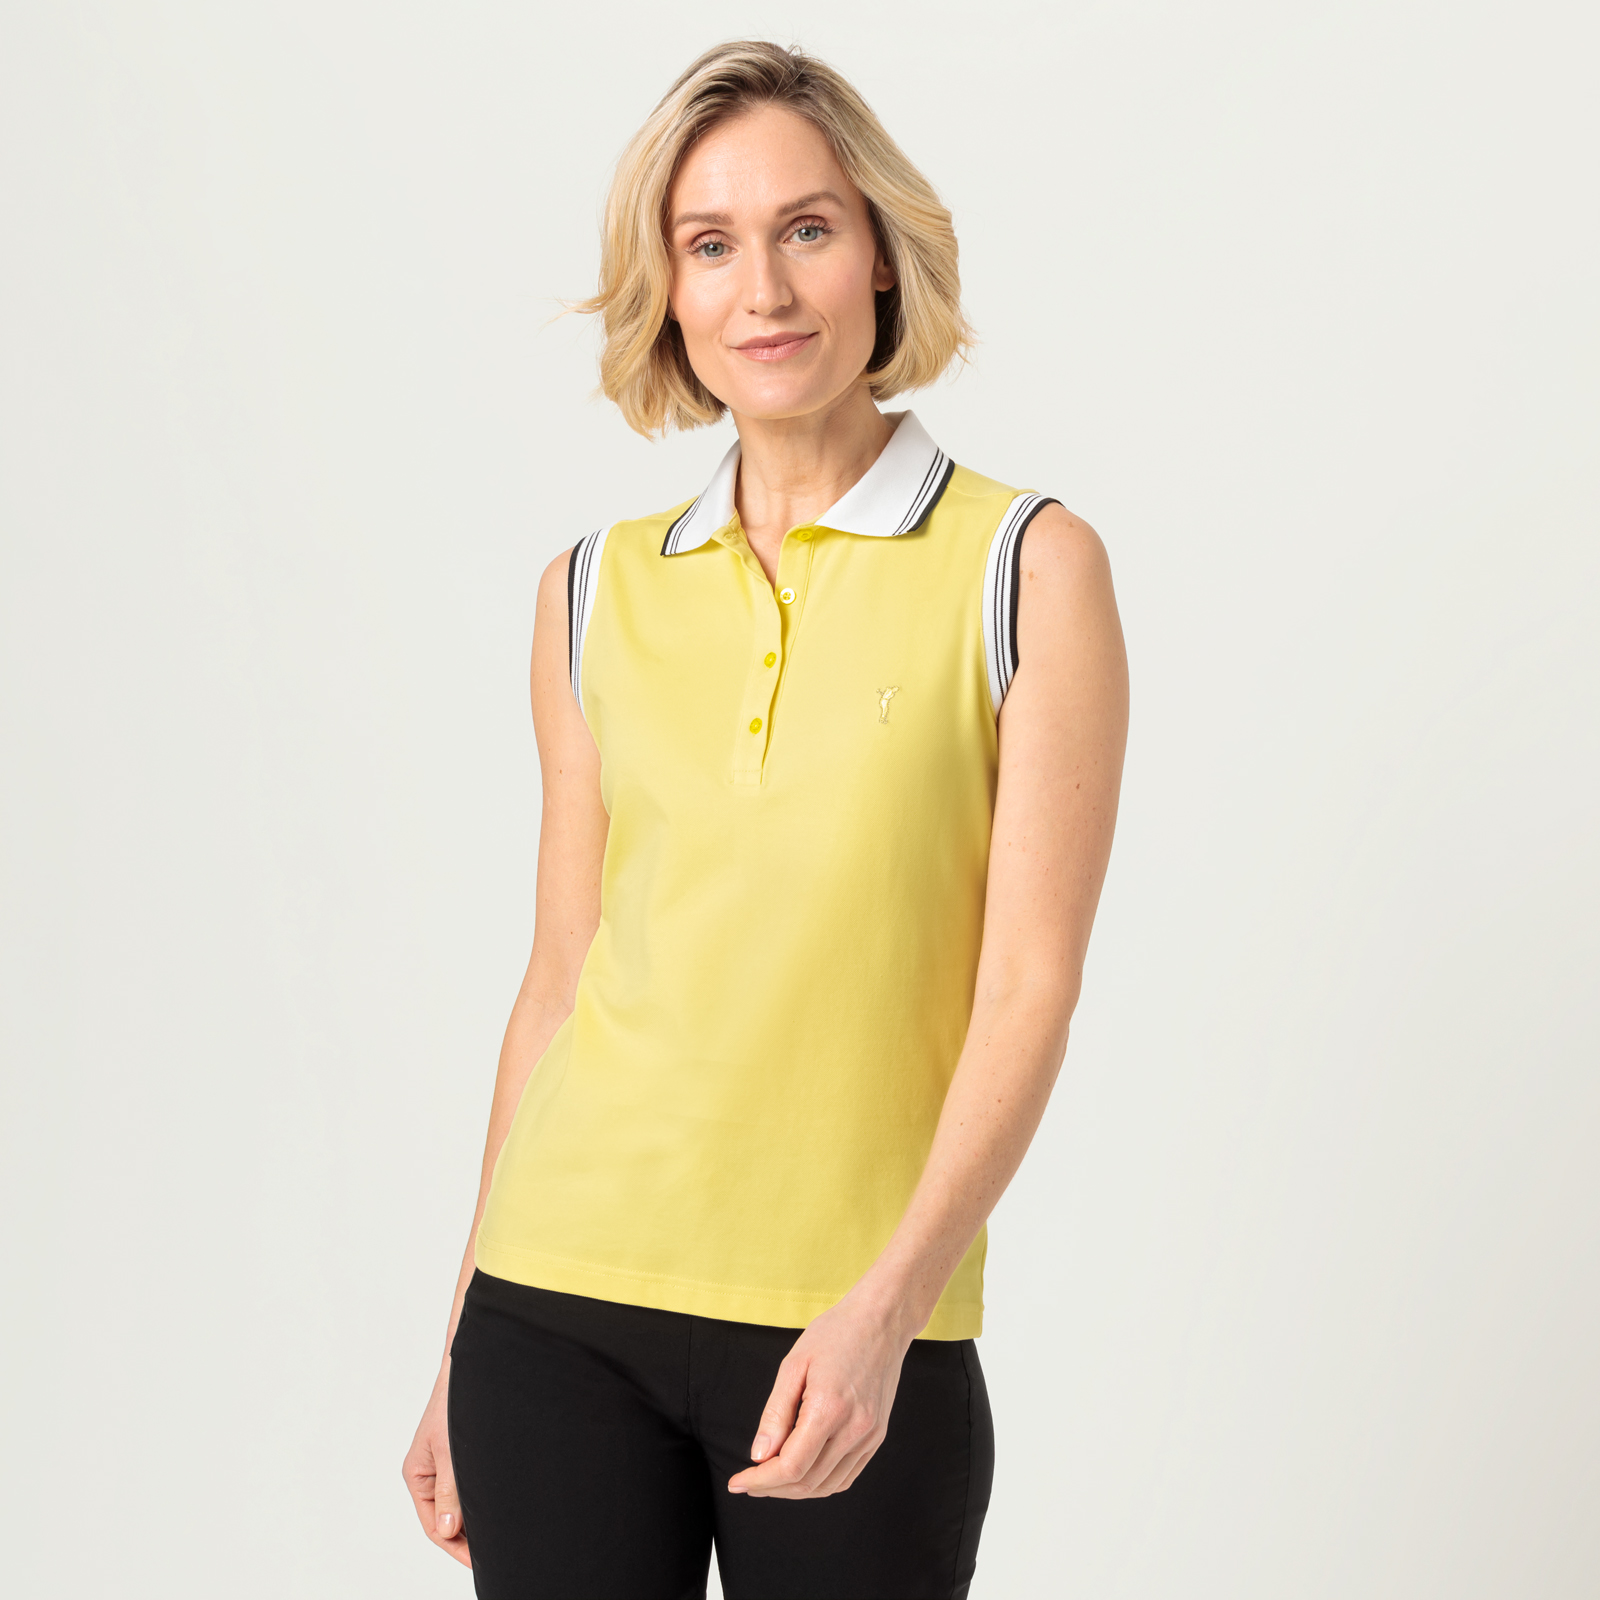 Airy ladies' polo shirt with ultraviolet protection 